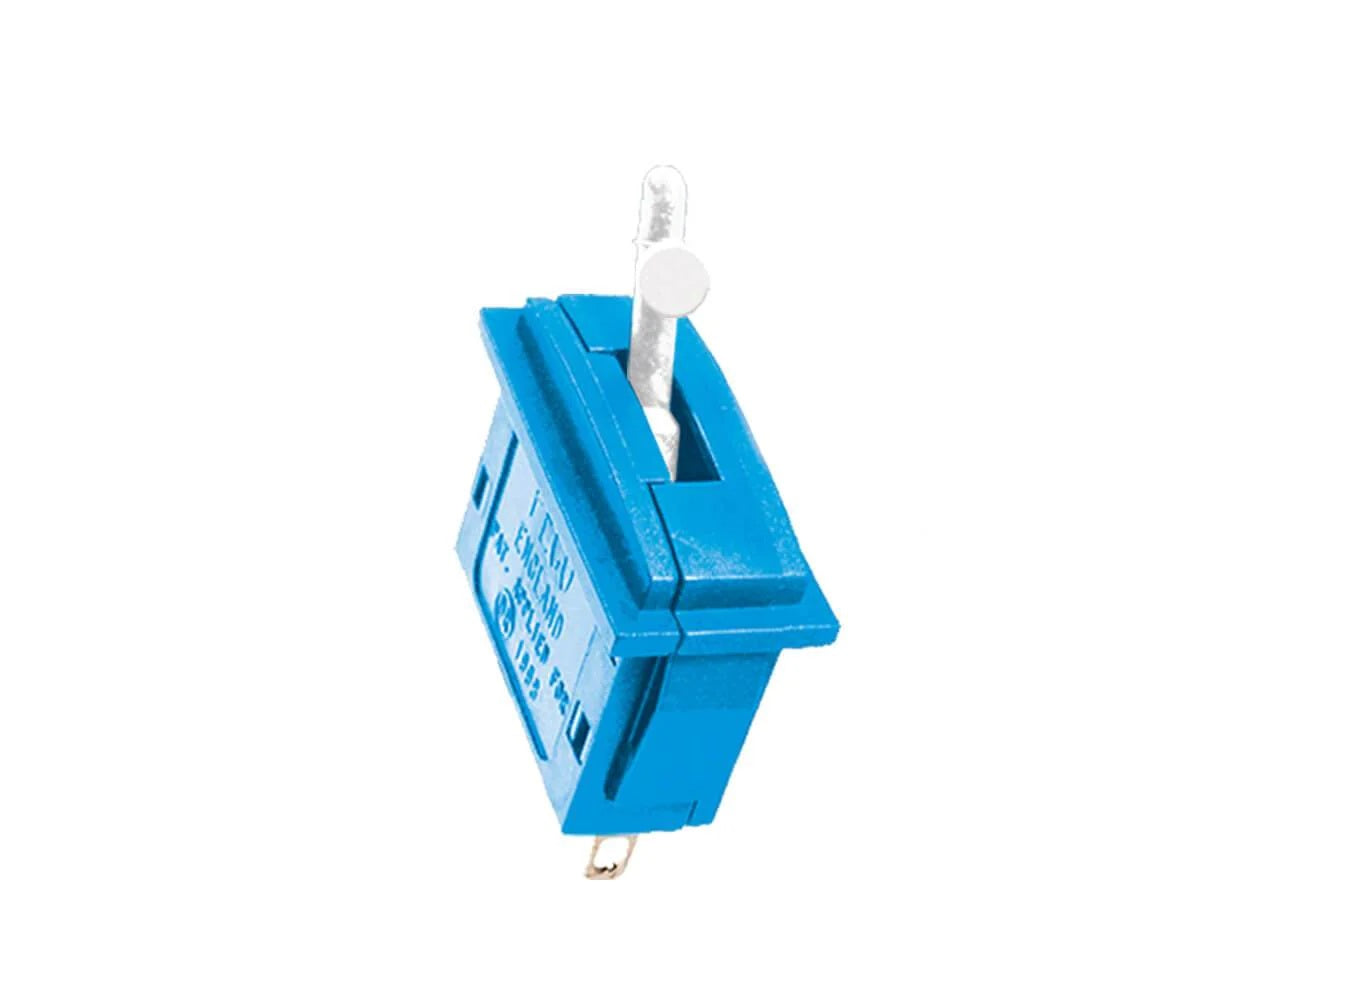 PL-22 On-Off Switch (style matches PL-26 series)